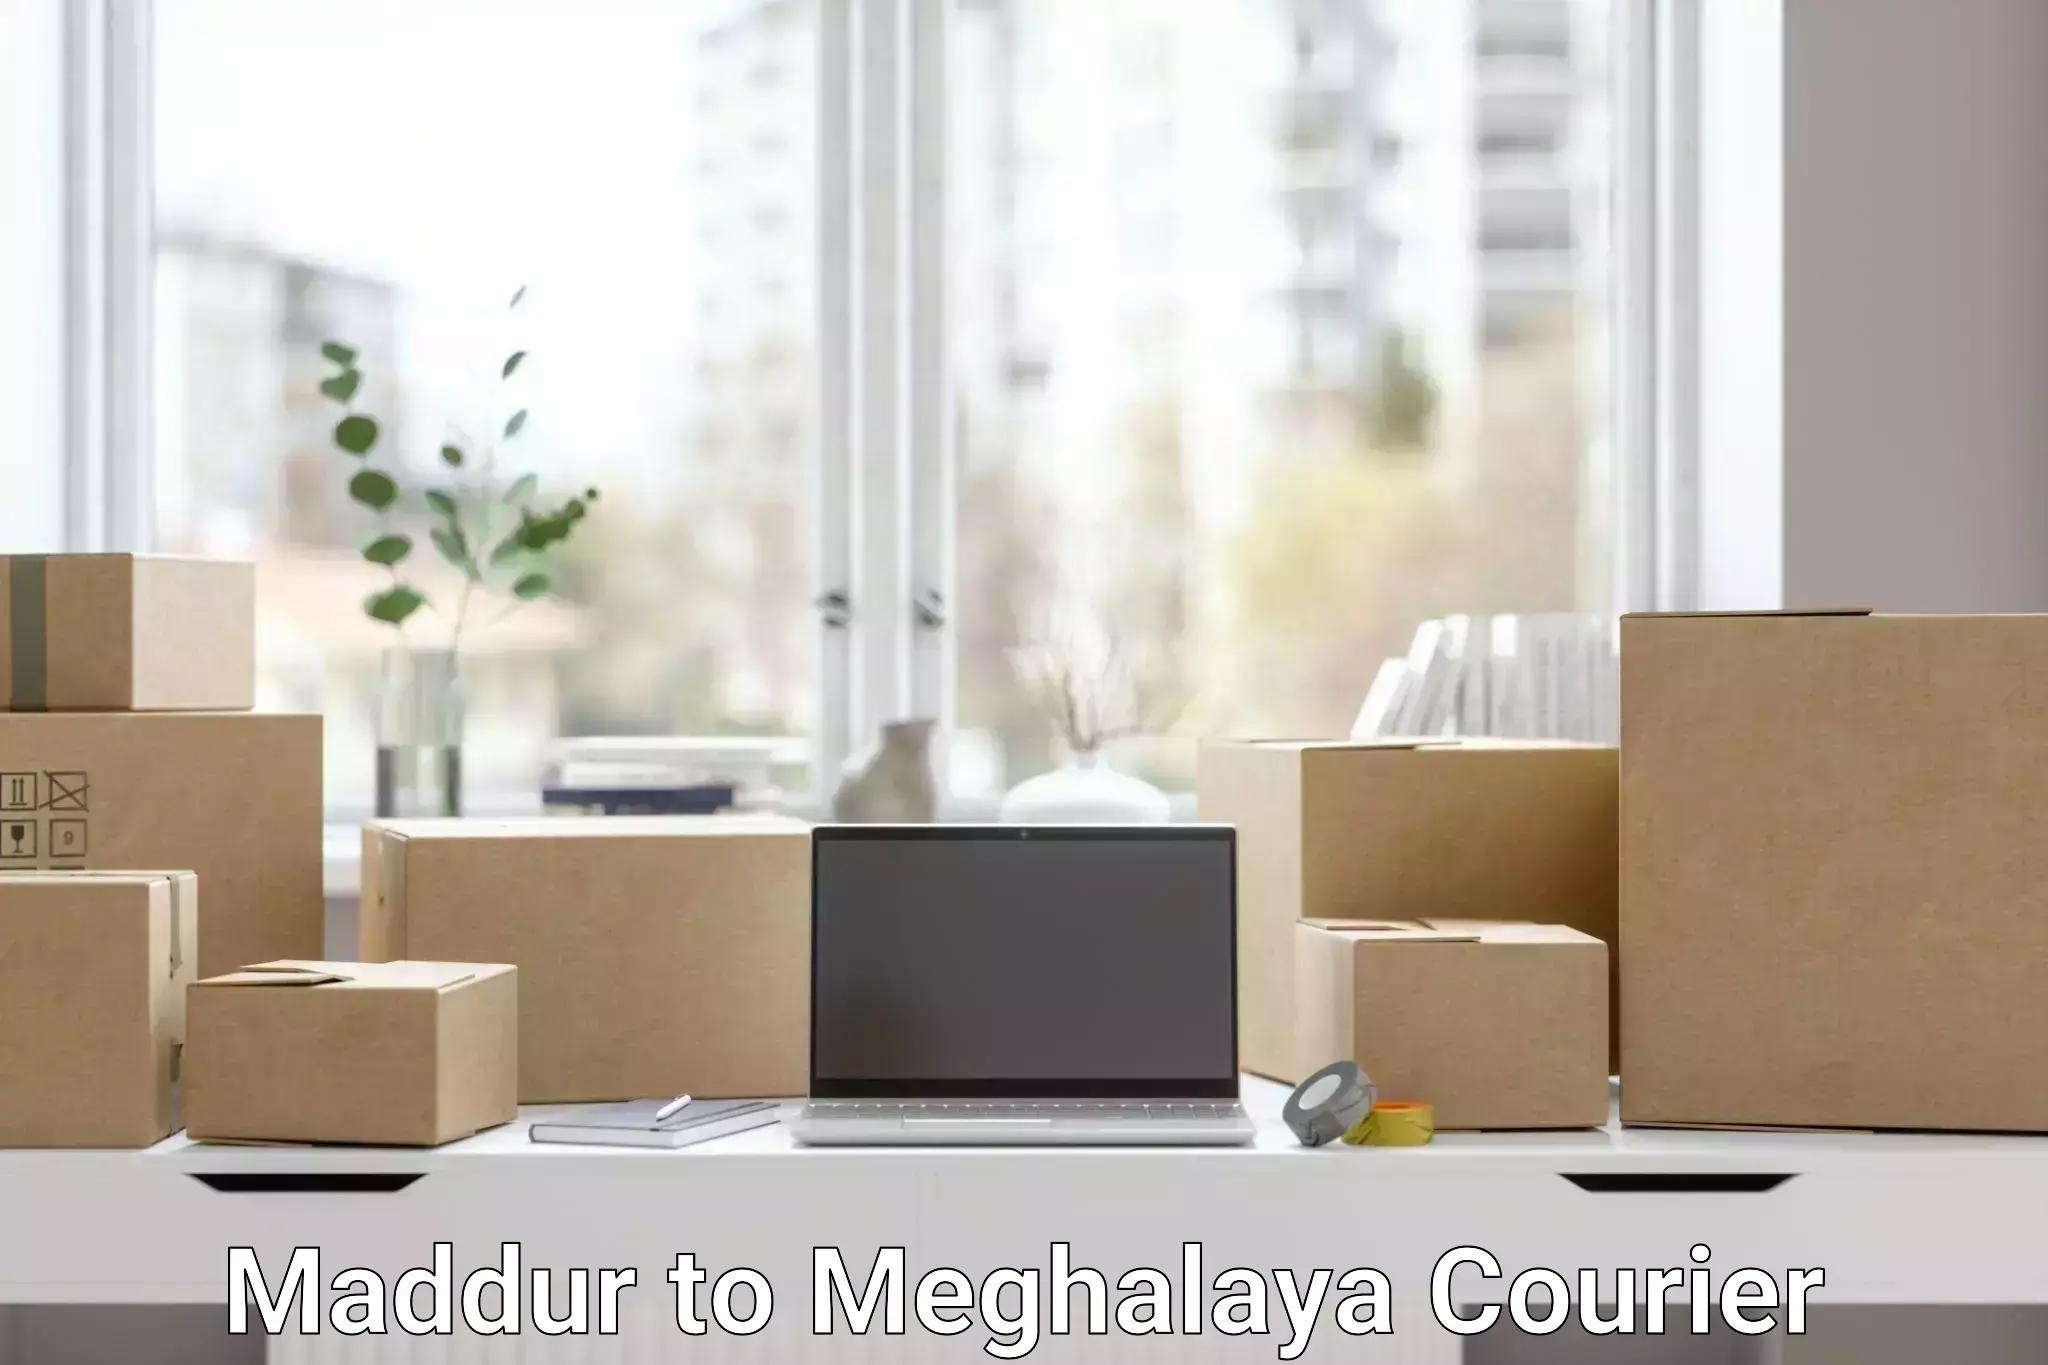 Business delivery service in Maddur to Nongstoin